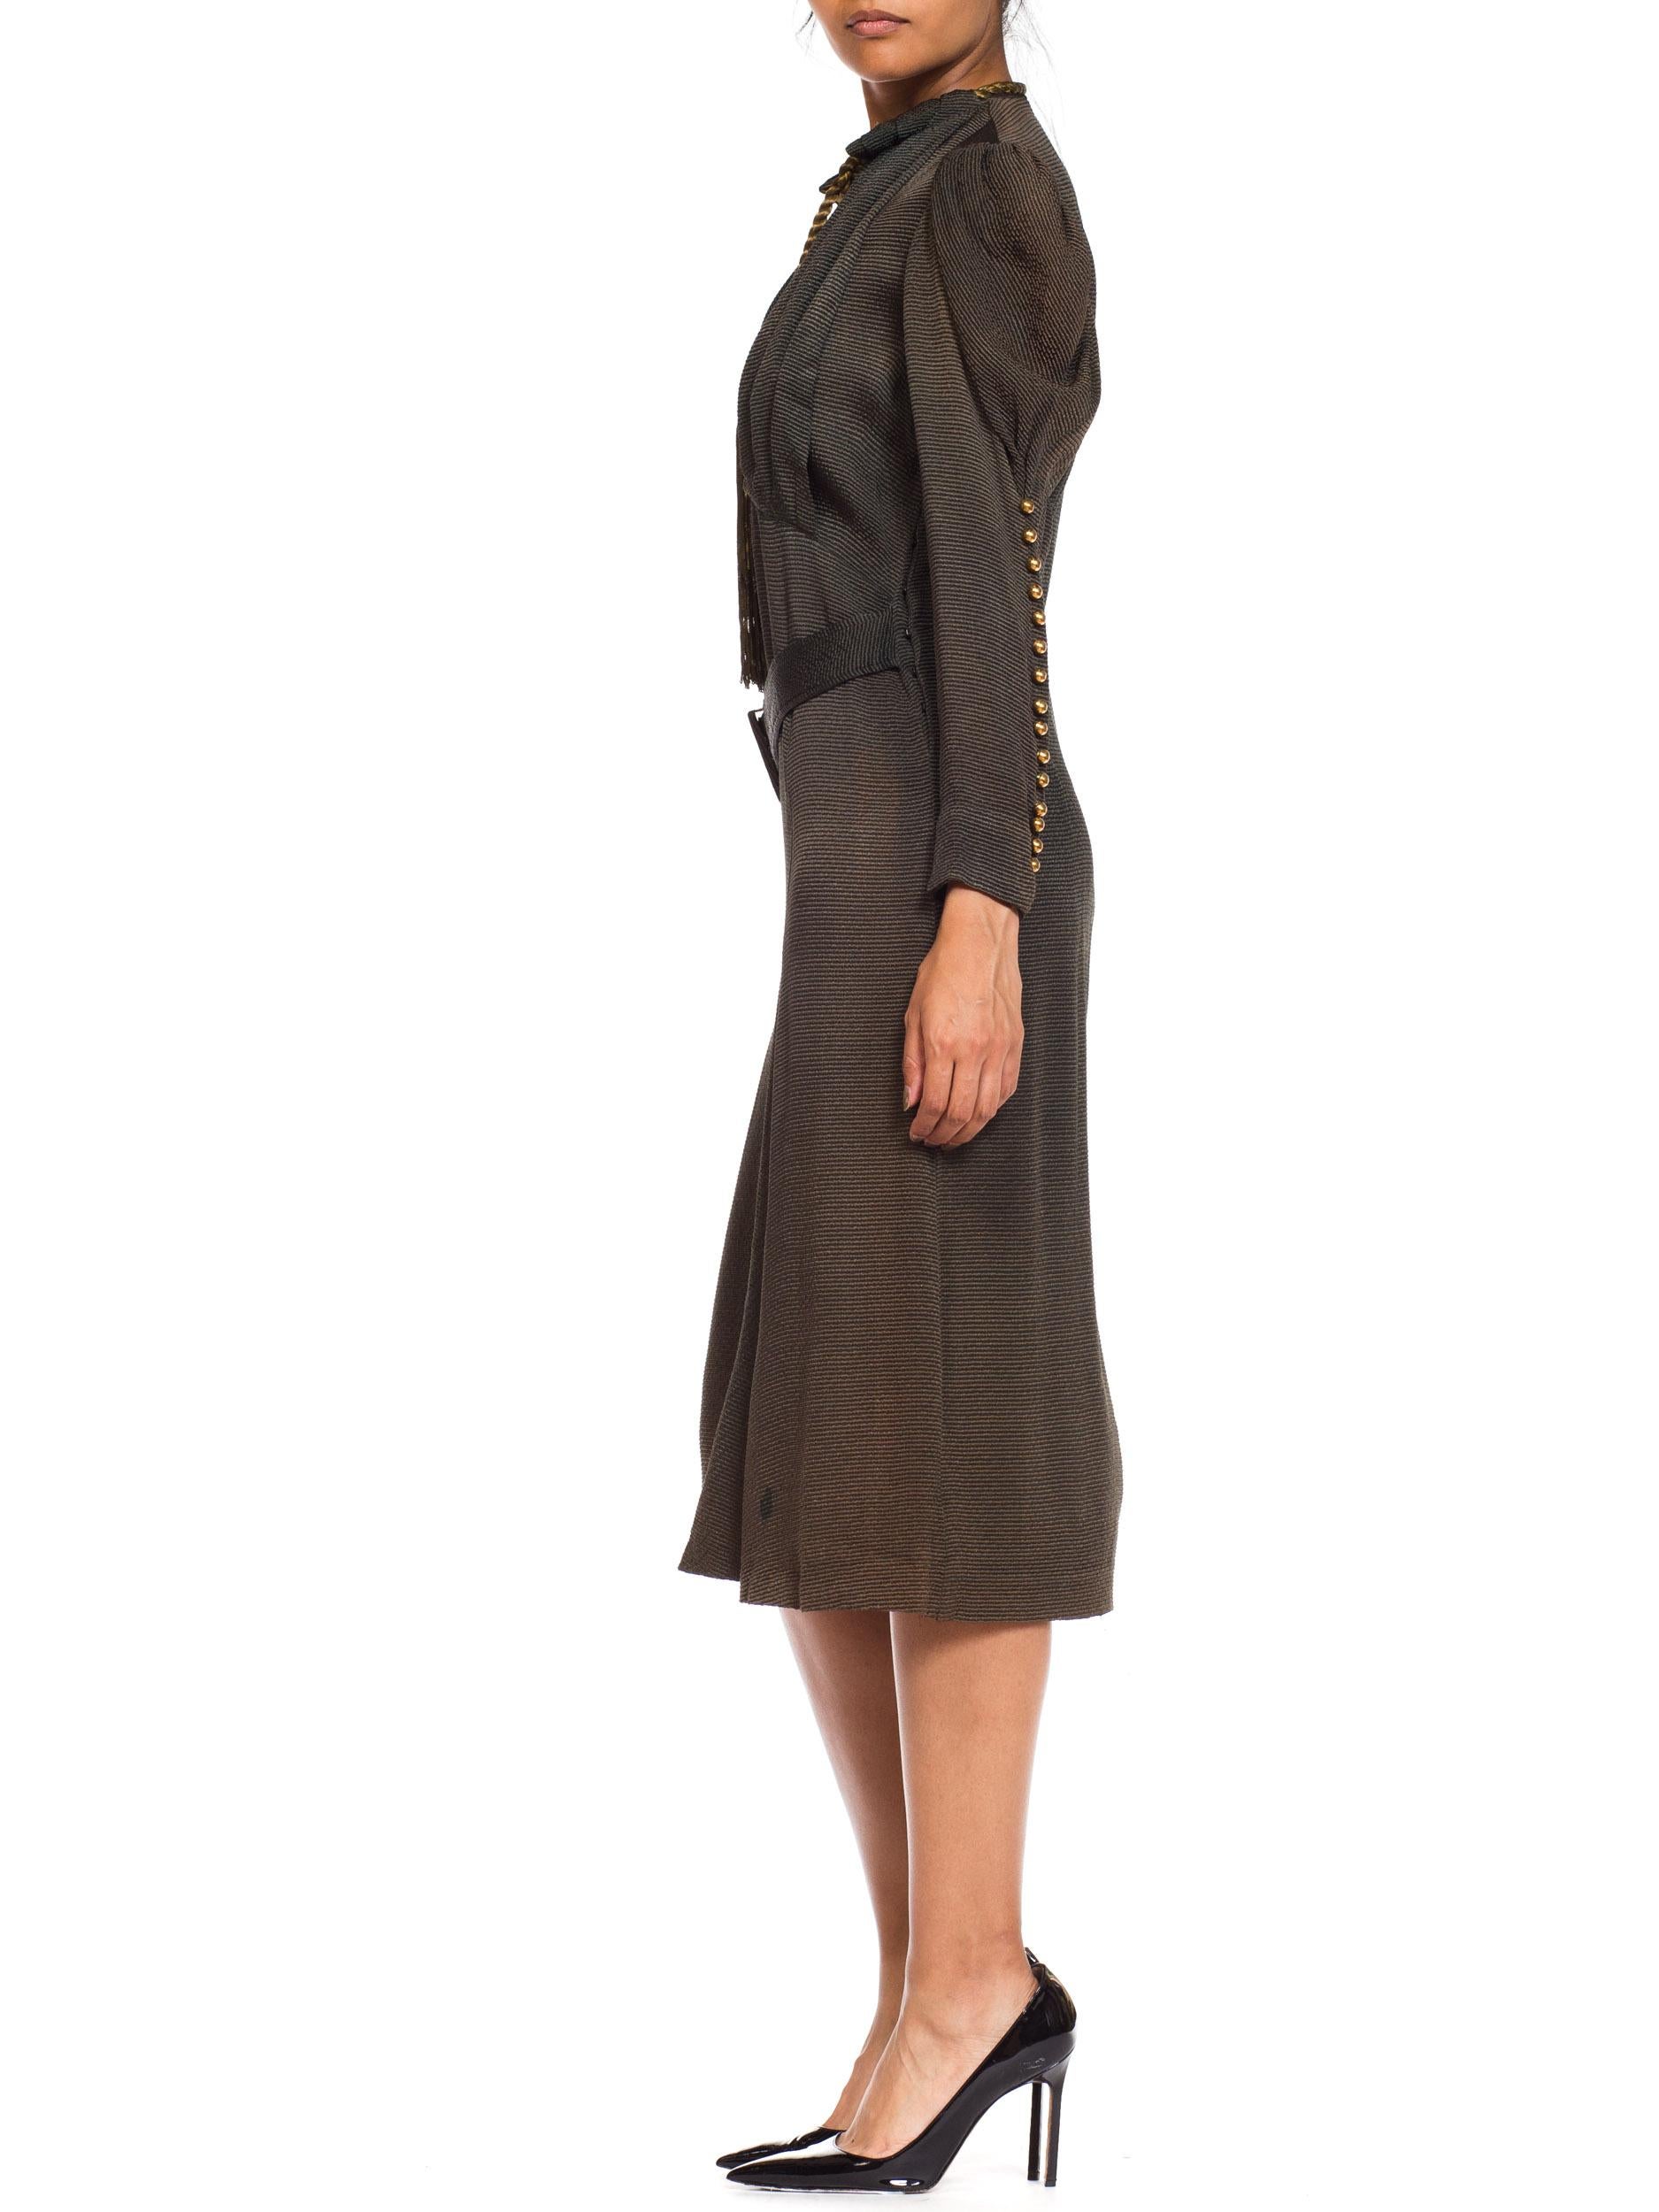 1930s Olive Green Textured Mutton Sleeve Dress 7